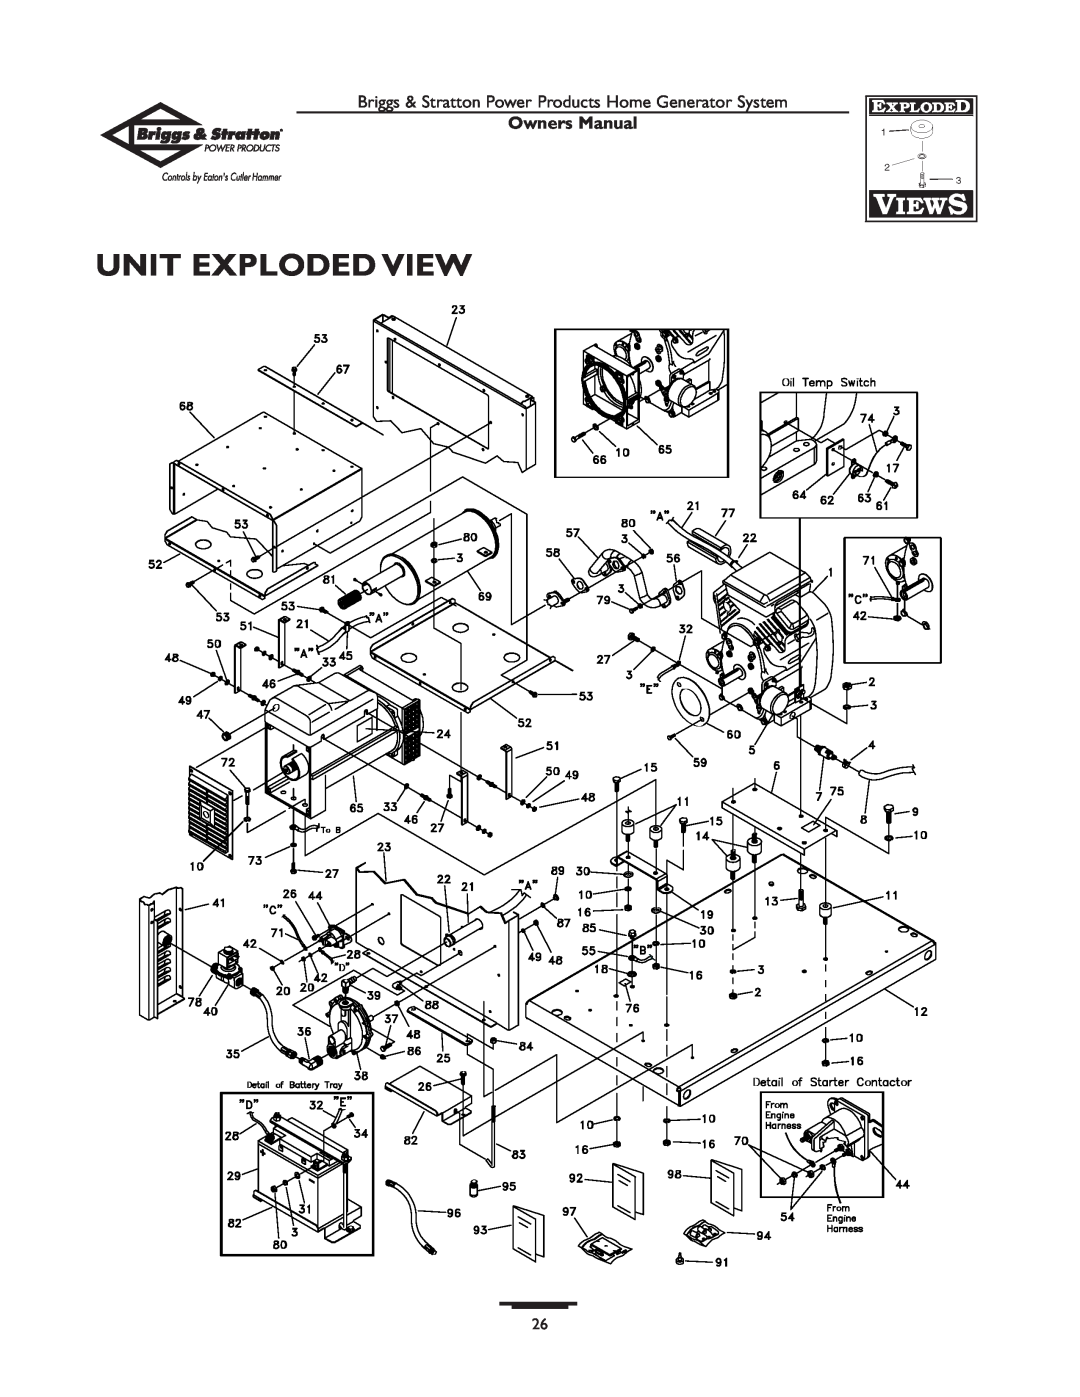 Briggs & Stratton 1679-0 owner manual Unit Exploded View, Owners Manual 